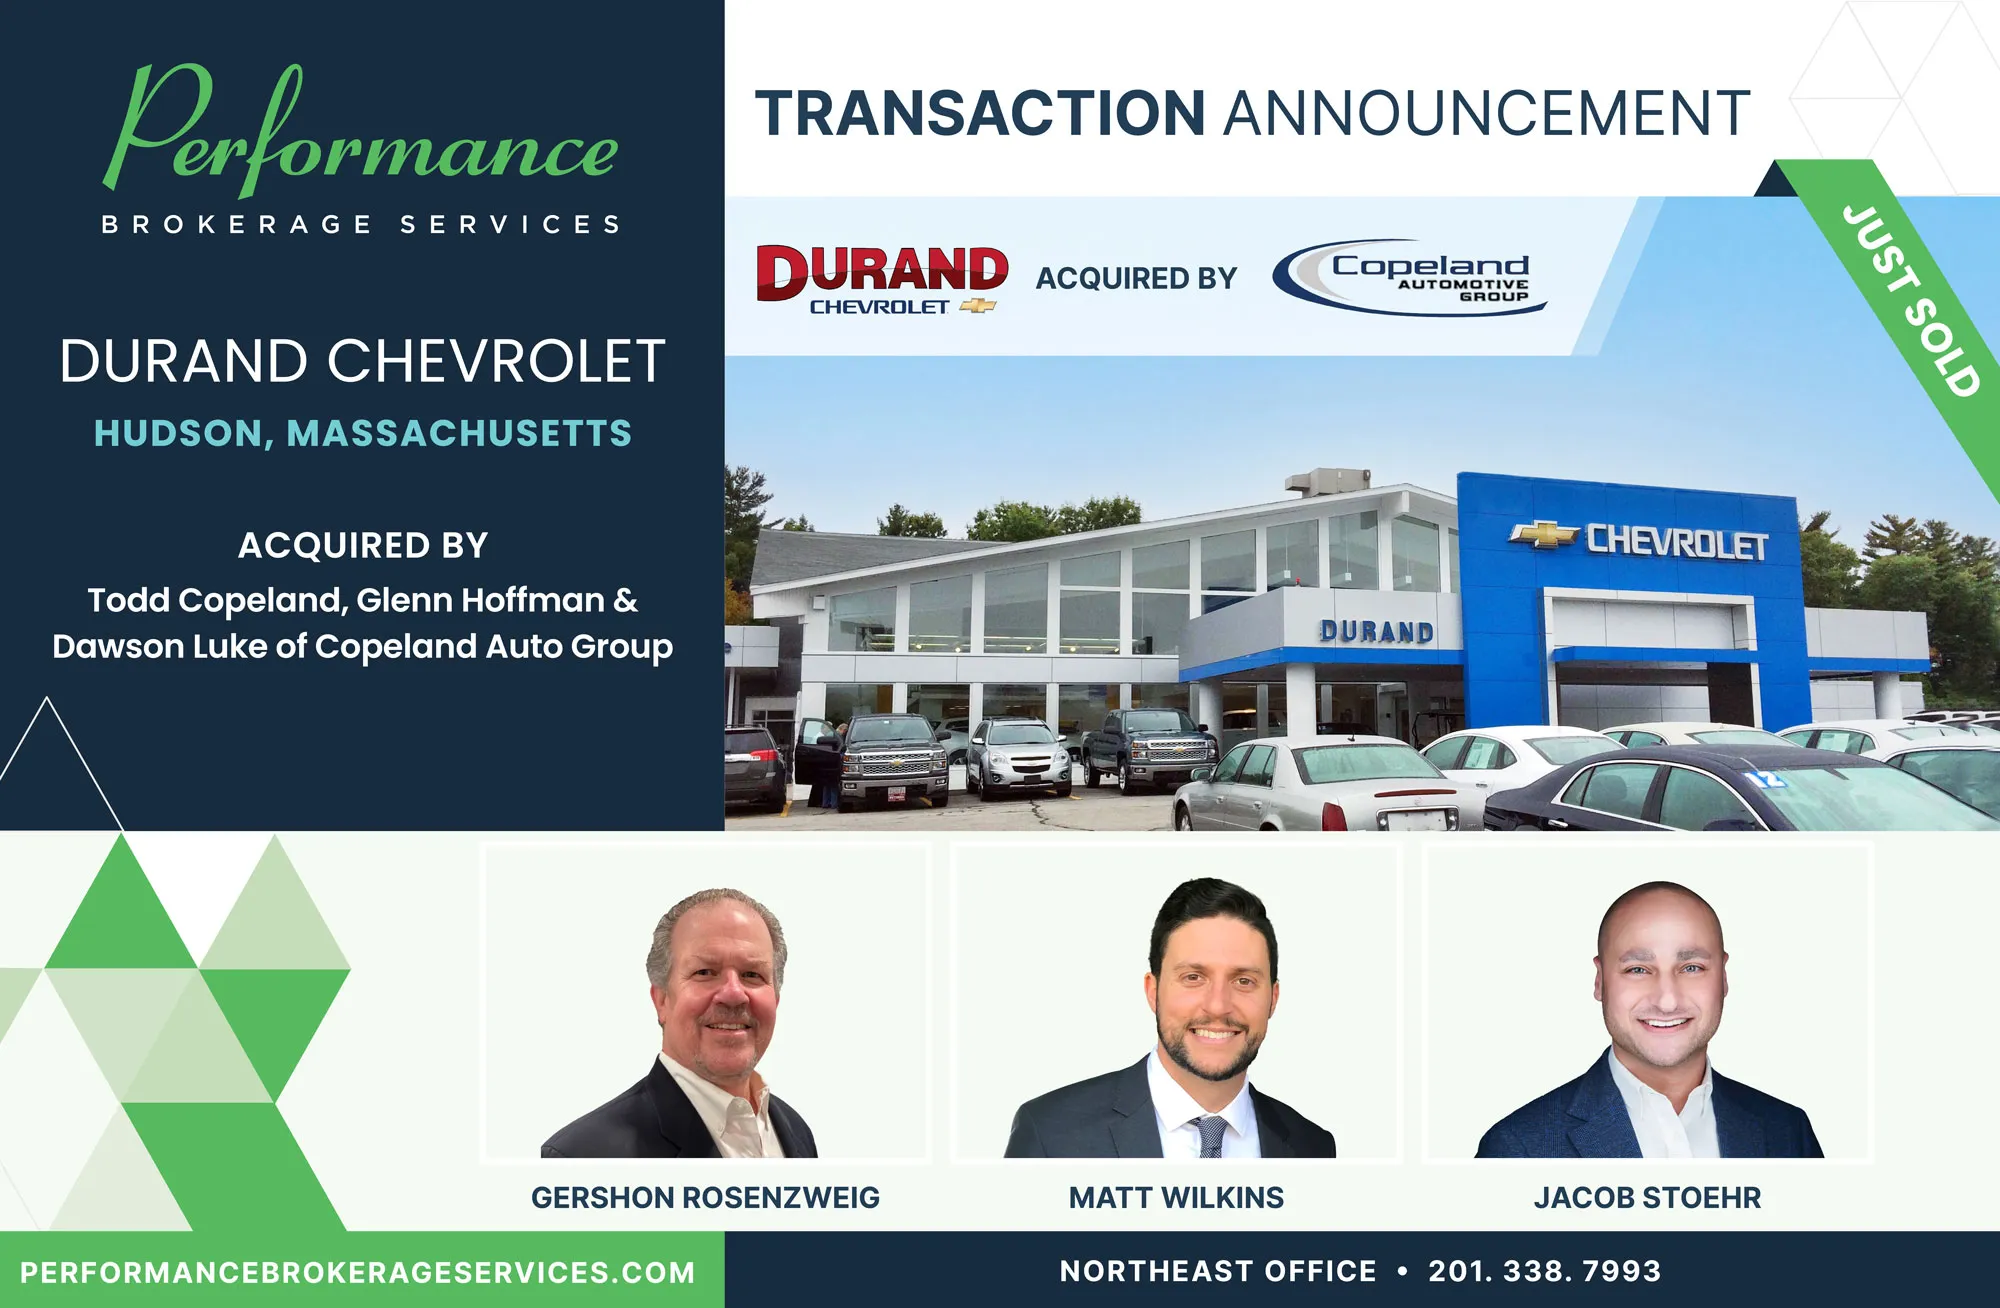 Durand Chevrolet sells to Copeland Automotive Group with Performance Brokerage